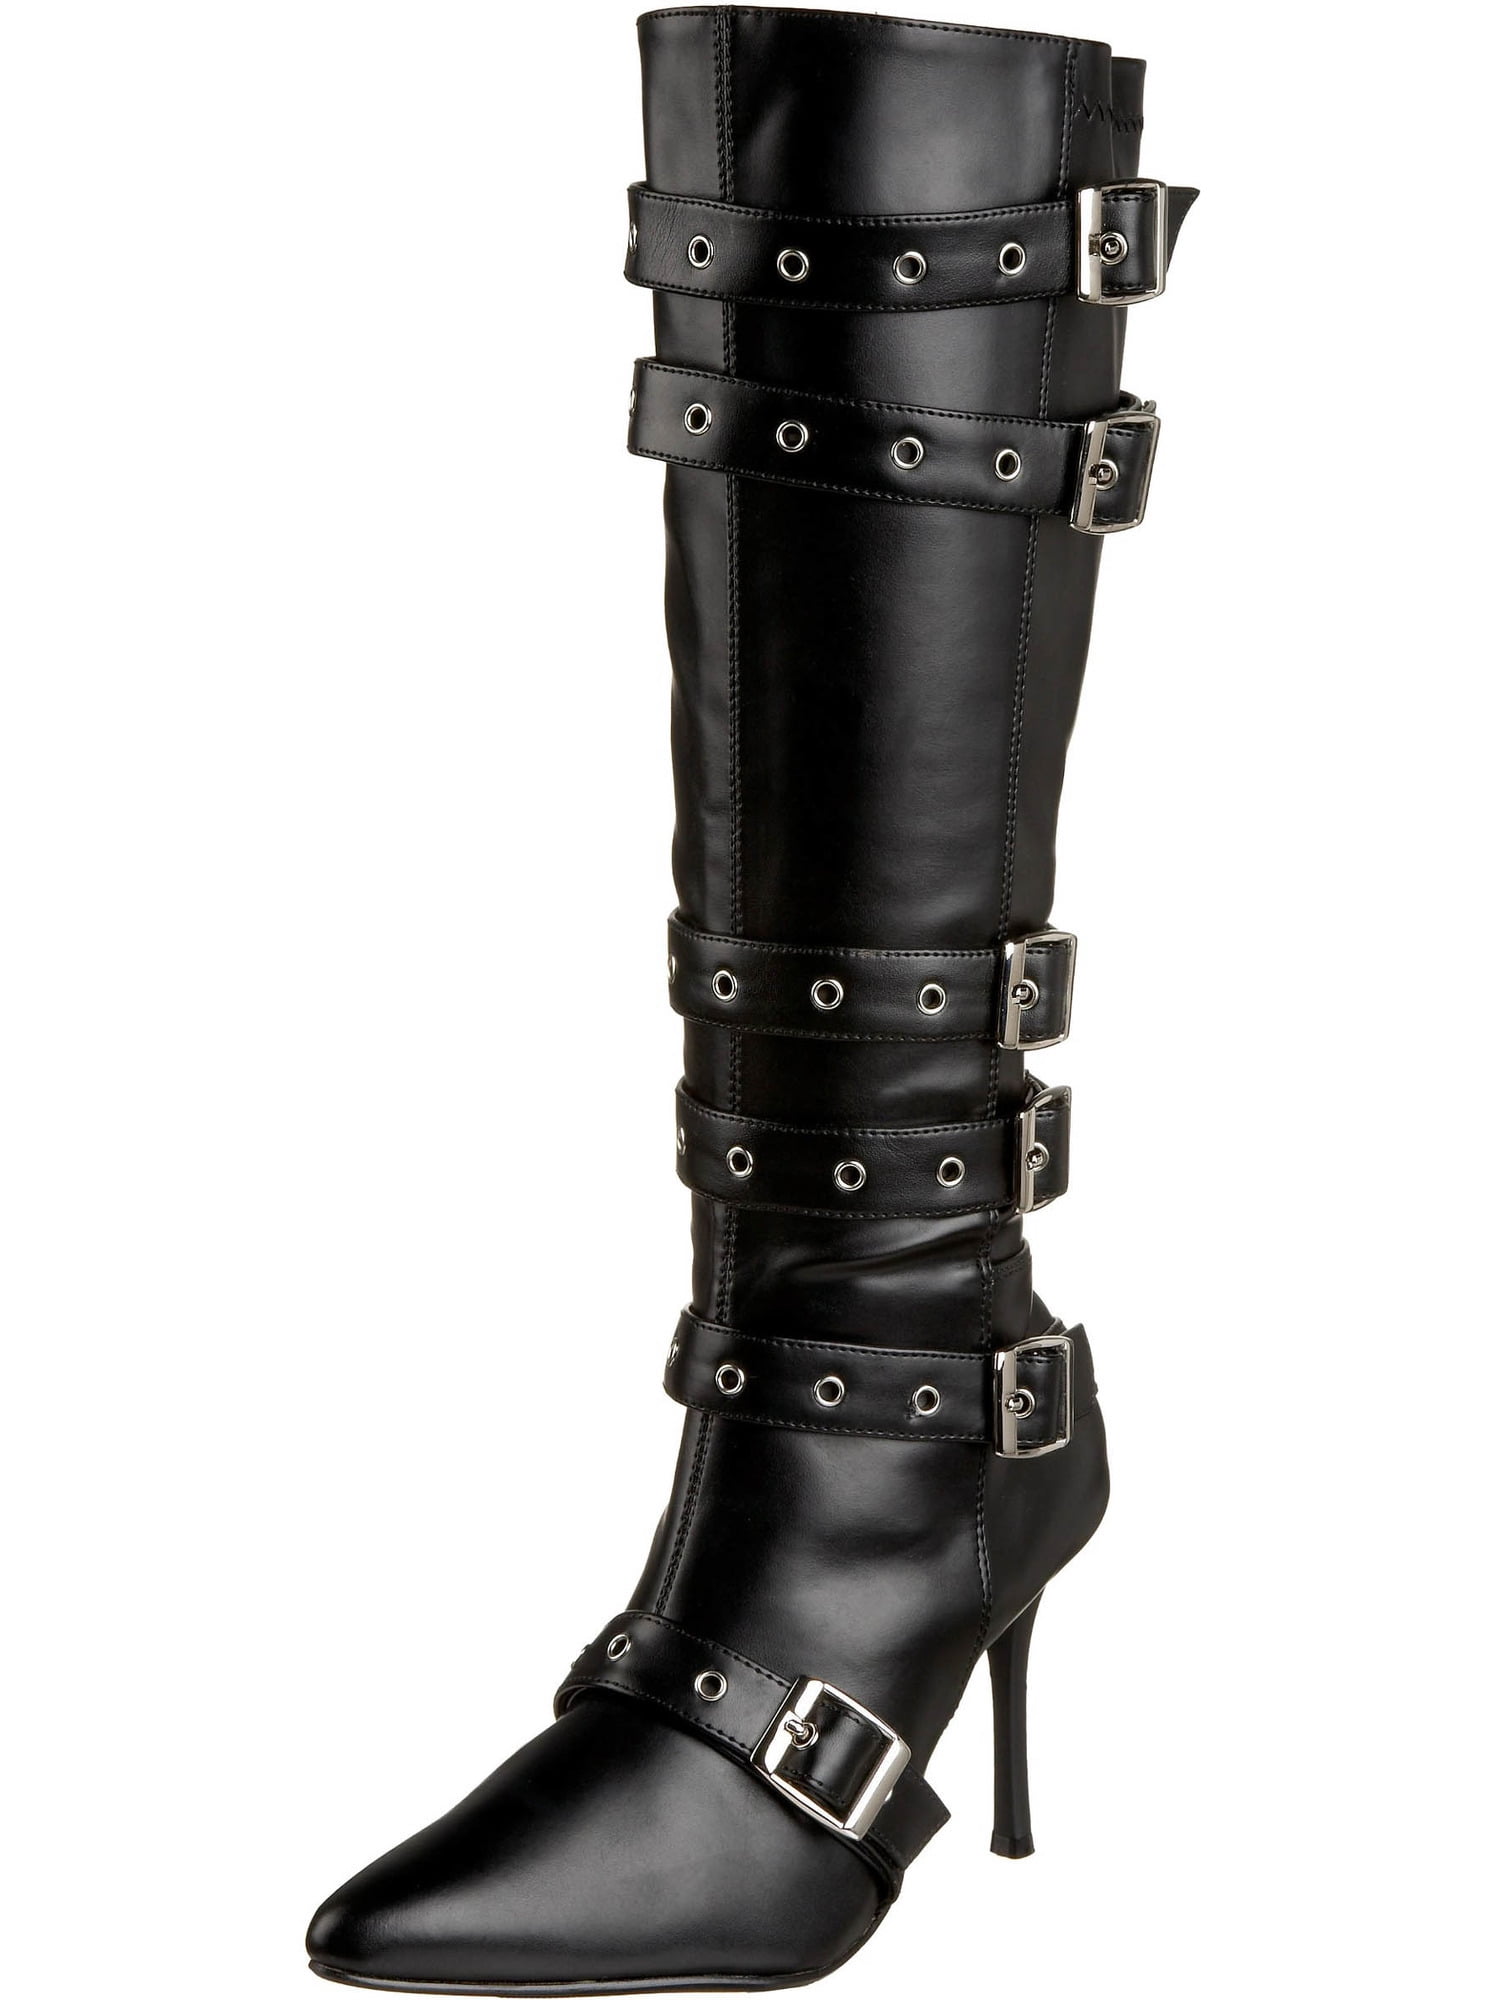 Funtasma Womens Sexy Boots Gothic Style 3 34 Inch High Heel Boot